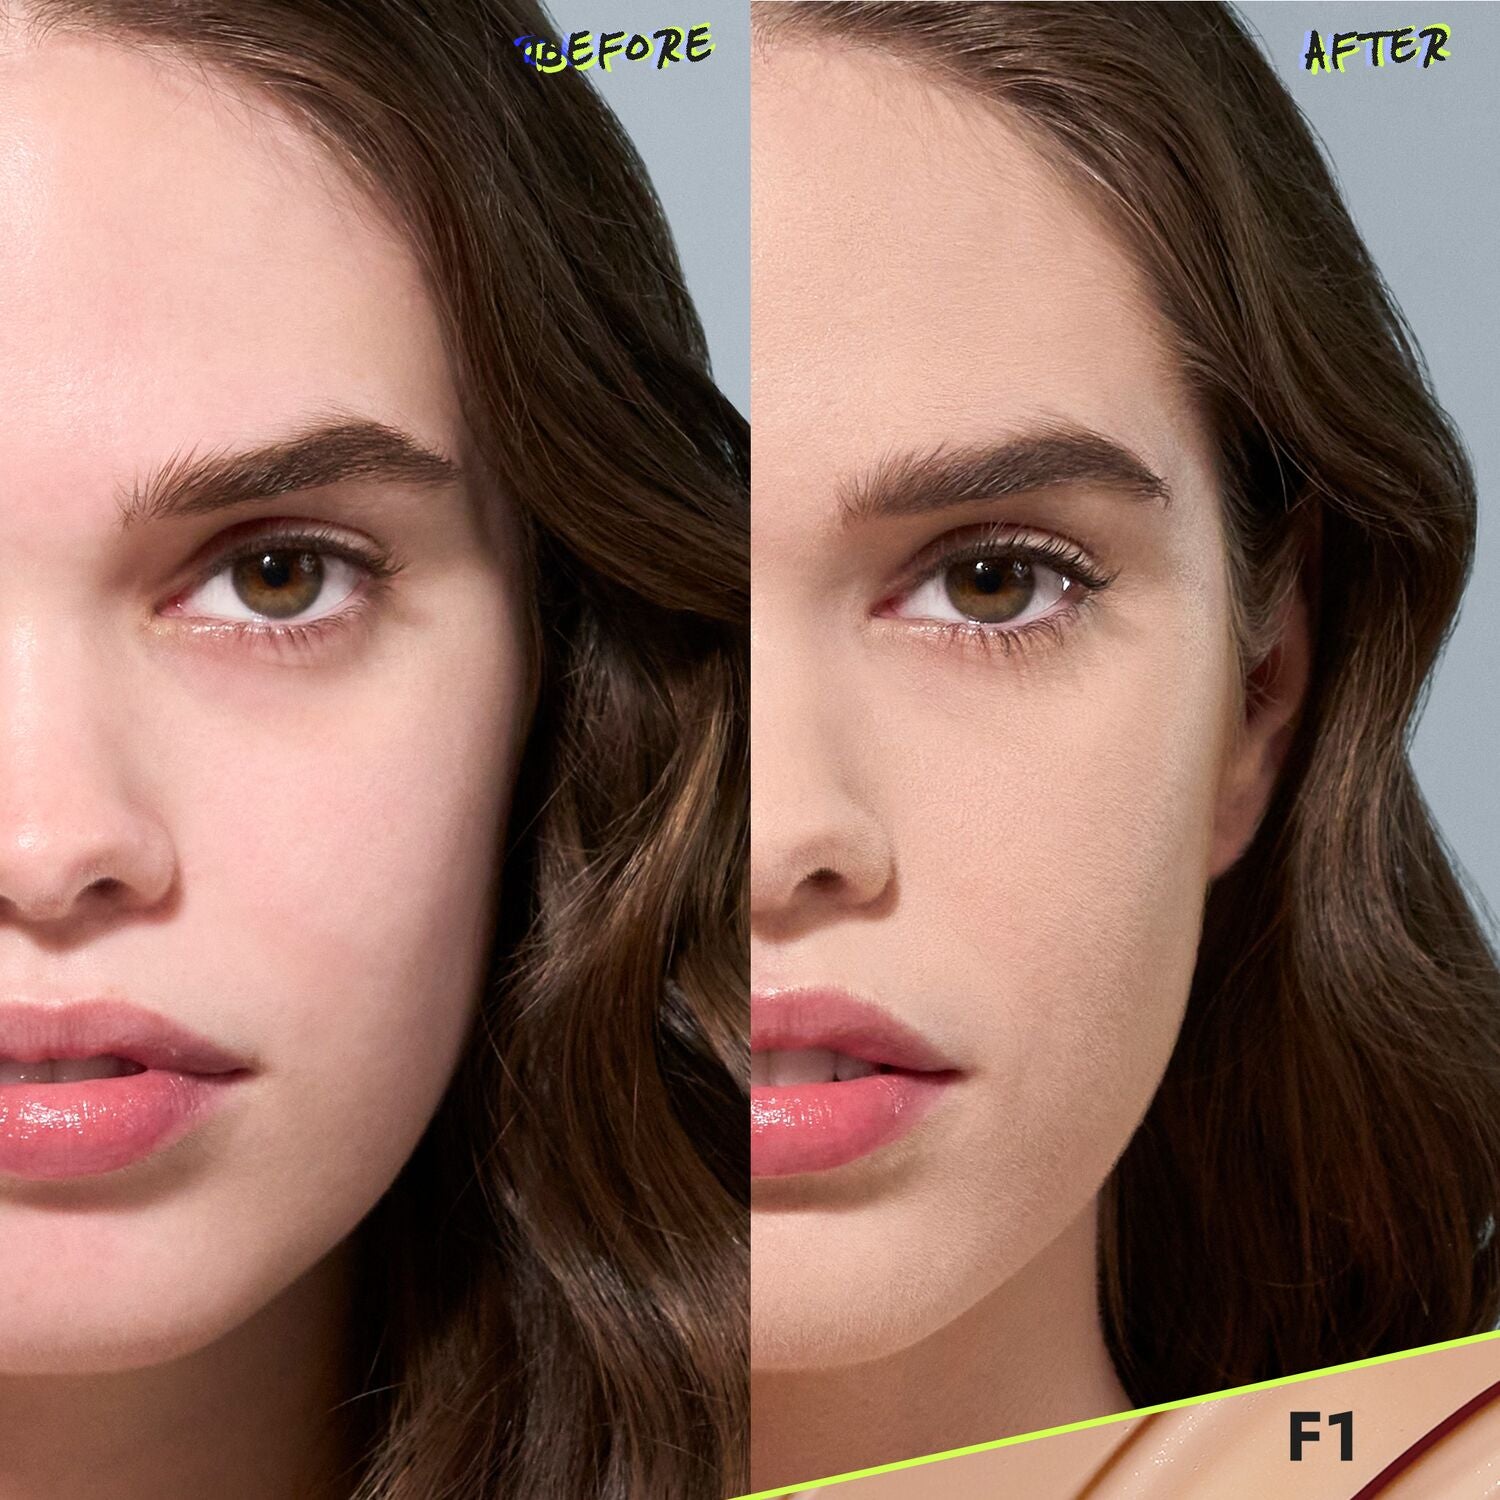 CoverFX Power Play Foundation before and after model image in shade F1